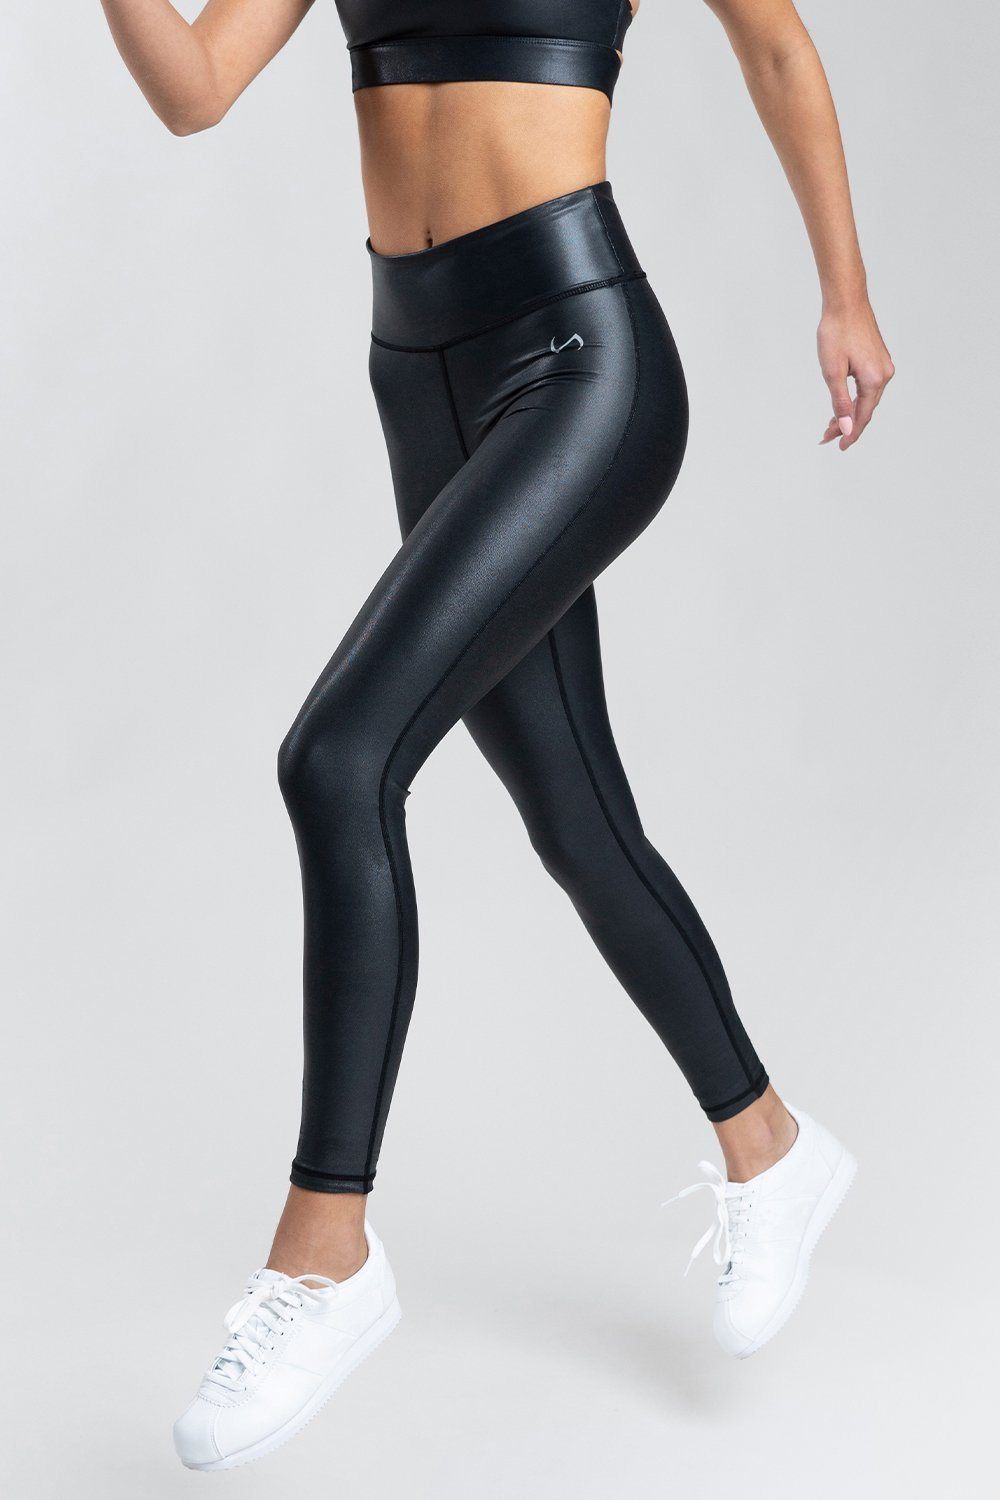 Custom Plus Size Women Running Clothing Wholesale Ladies Legging Sport  Tights - China Legging for Women and Plus Size Activewear price | Made-in- China.com